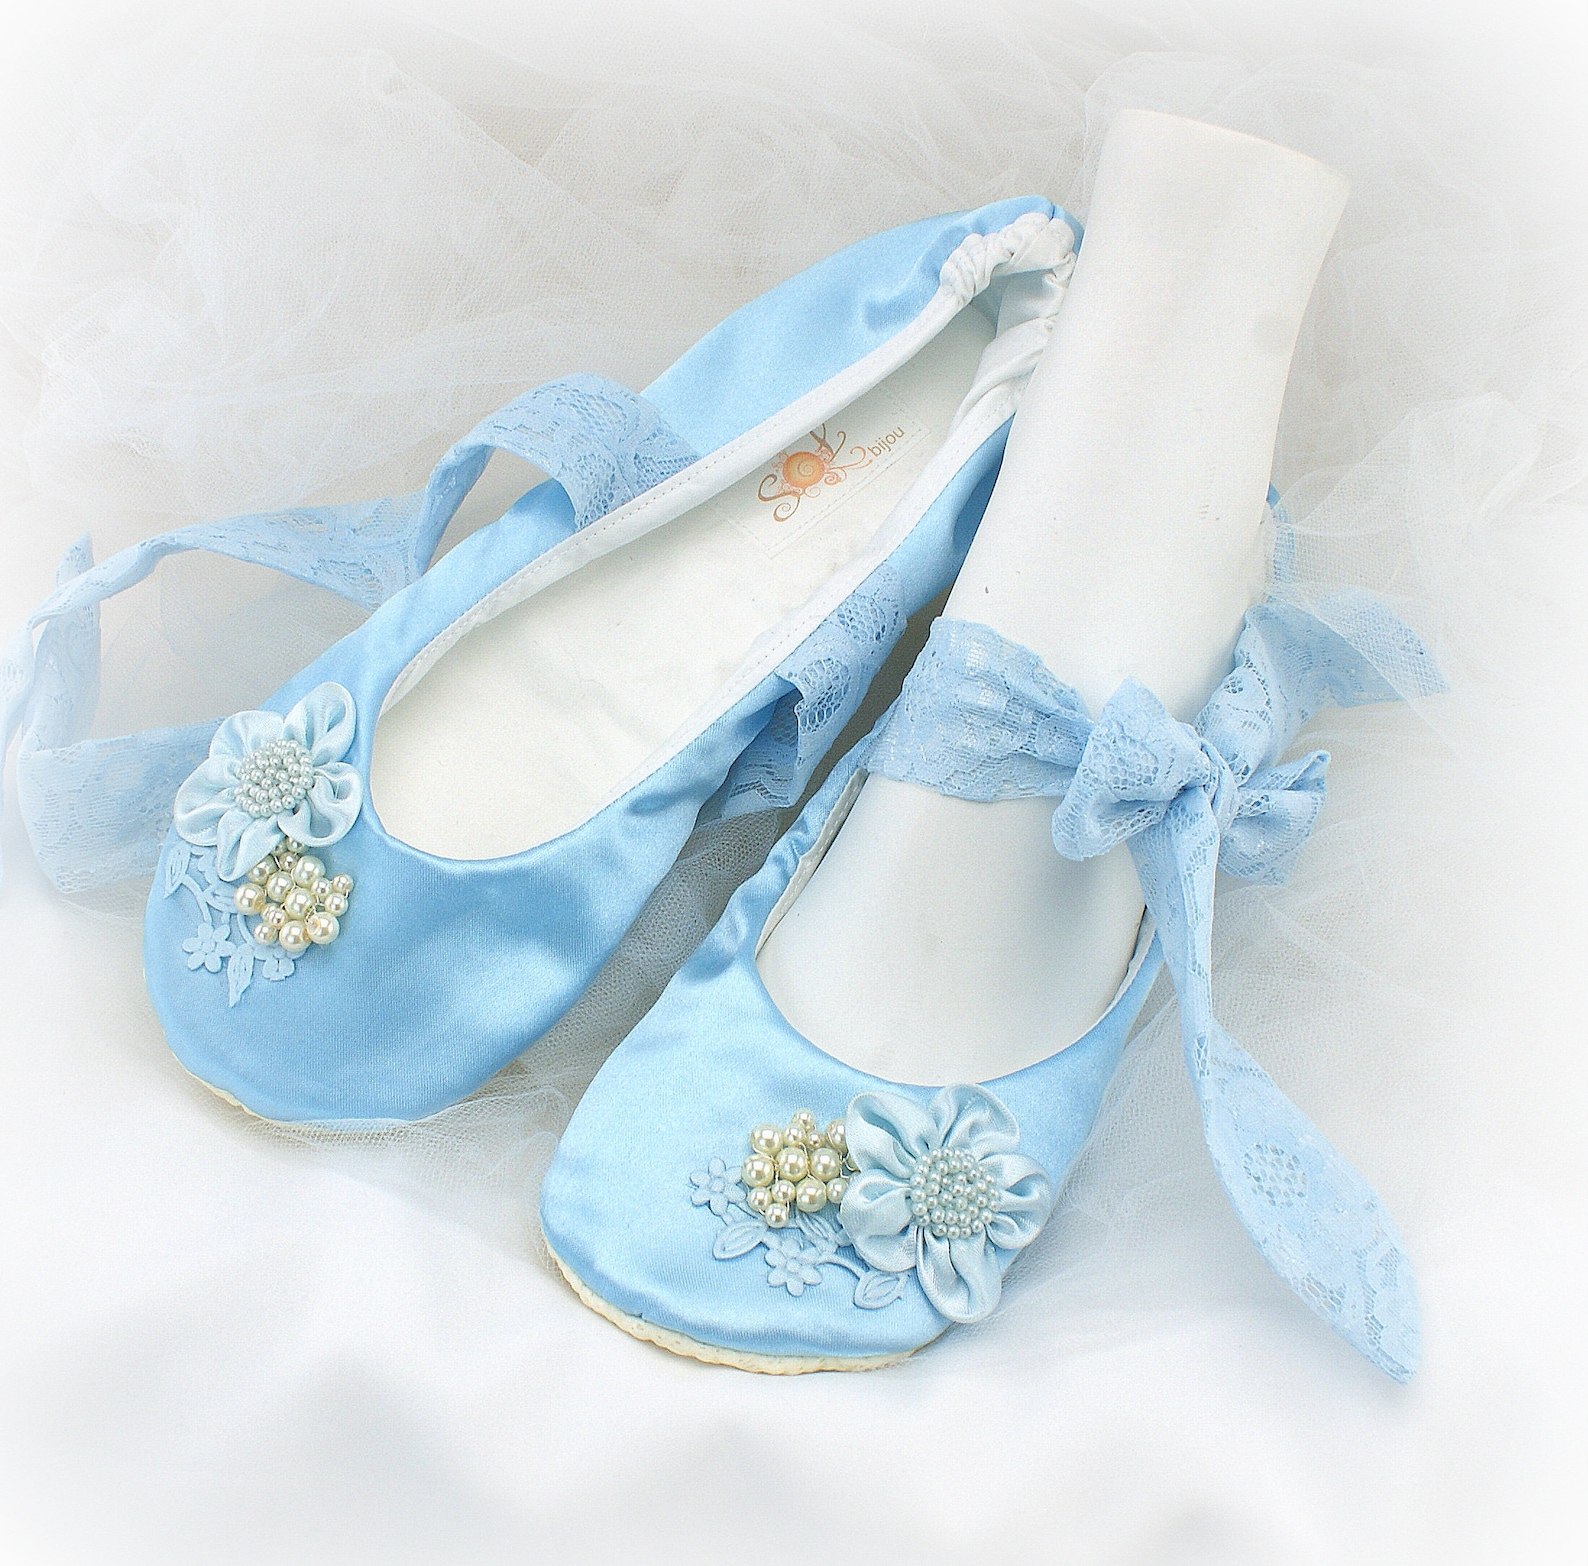 wedding ballet shoes in blue satin with lace side ties and pearls vintage style